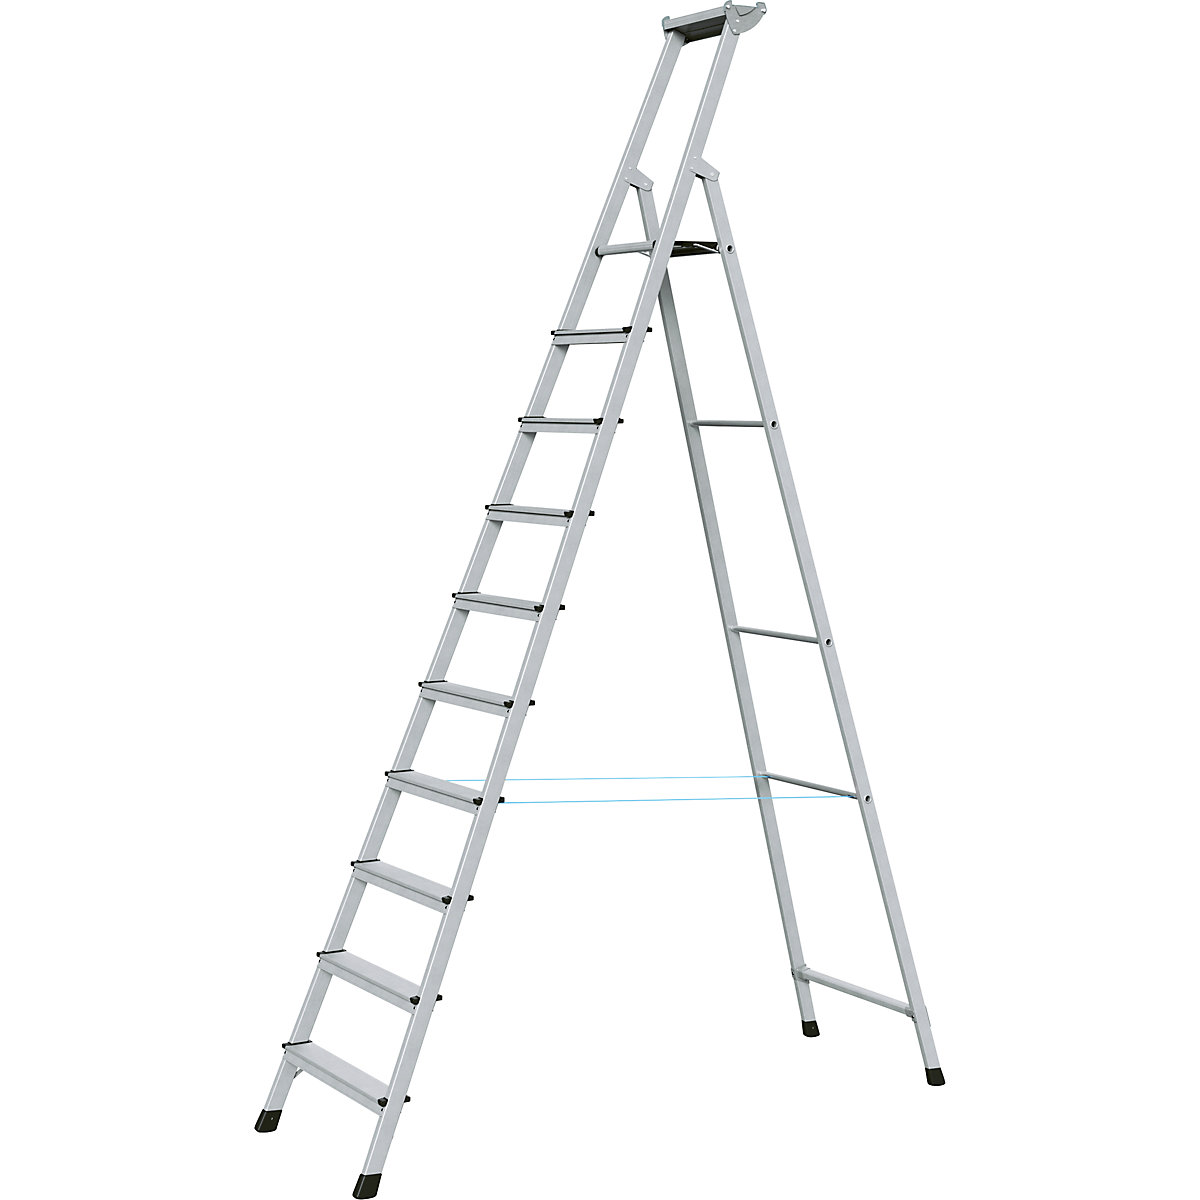 Professional step ladder, single sided access – ZARGES, anodised aluminium, with tool tray, for workshop and industrial use, 10 steps incl. platform-5